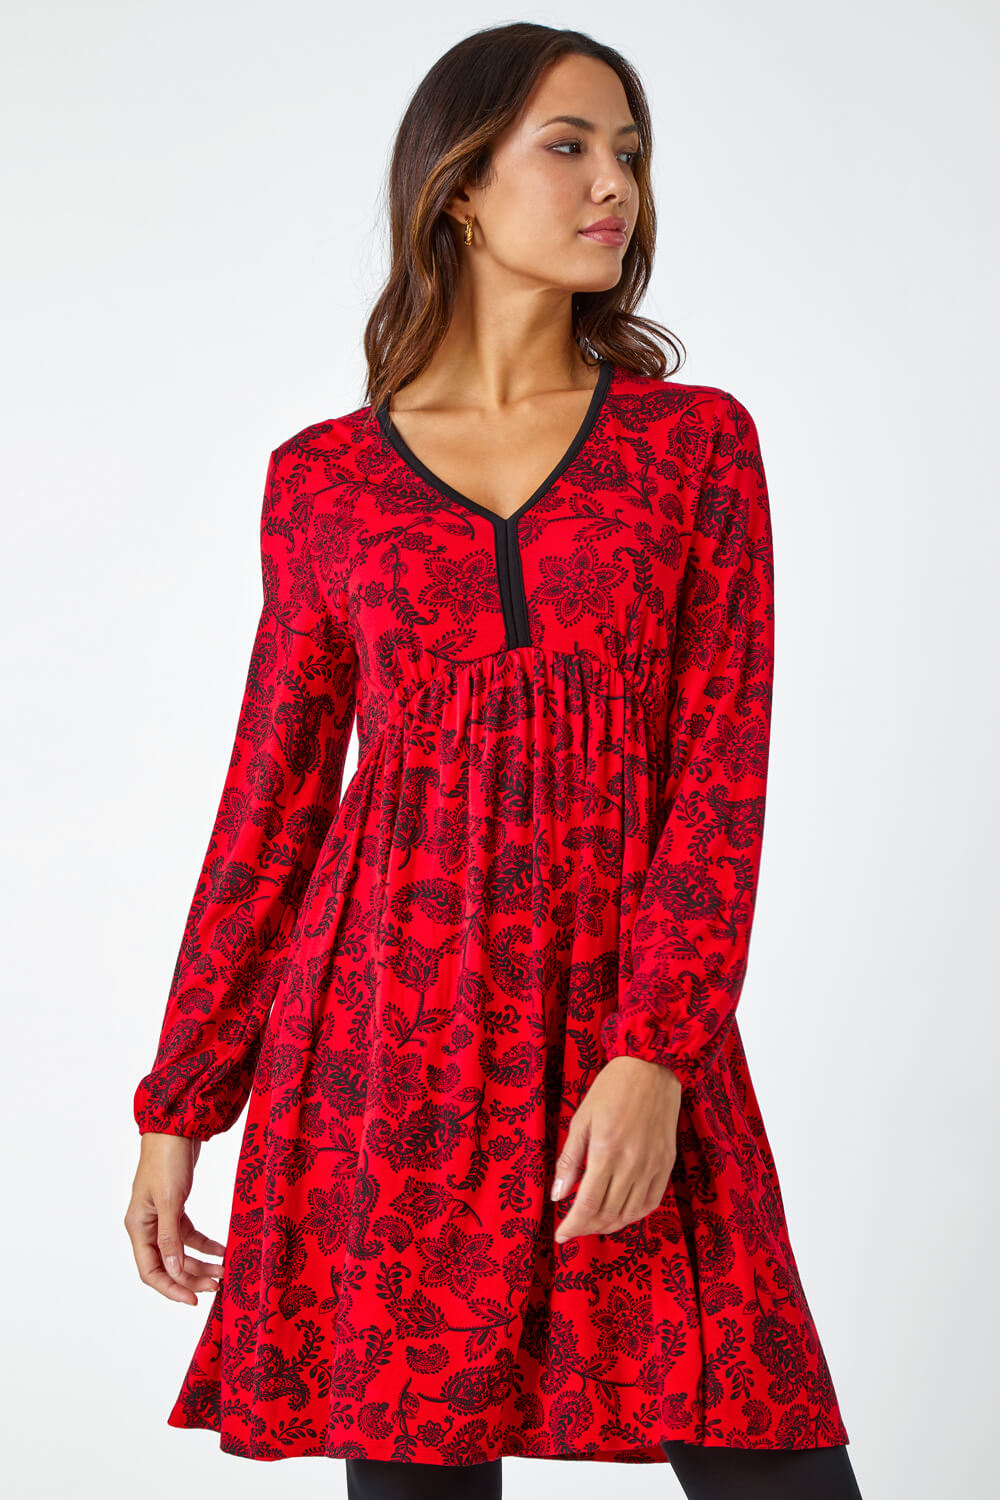 Red Floral Print Stretch Jersey Dress, Image 2 of 5